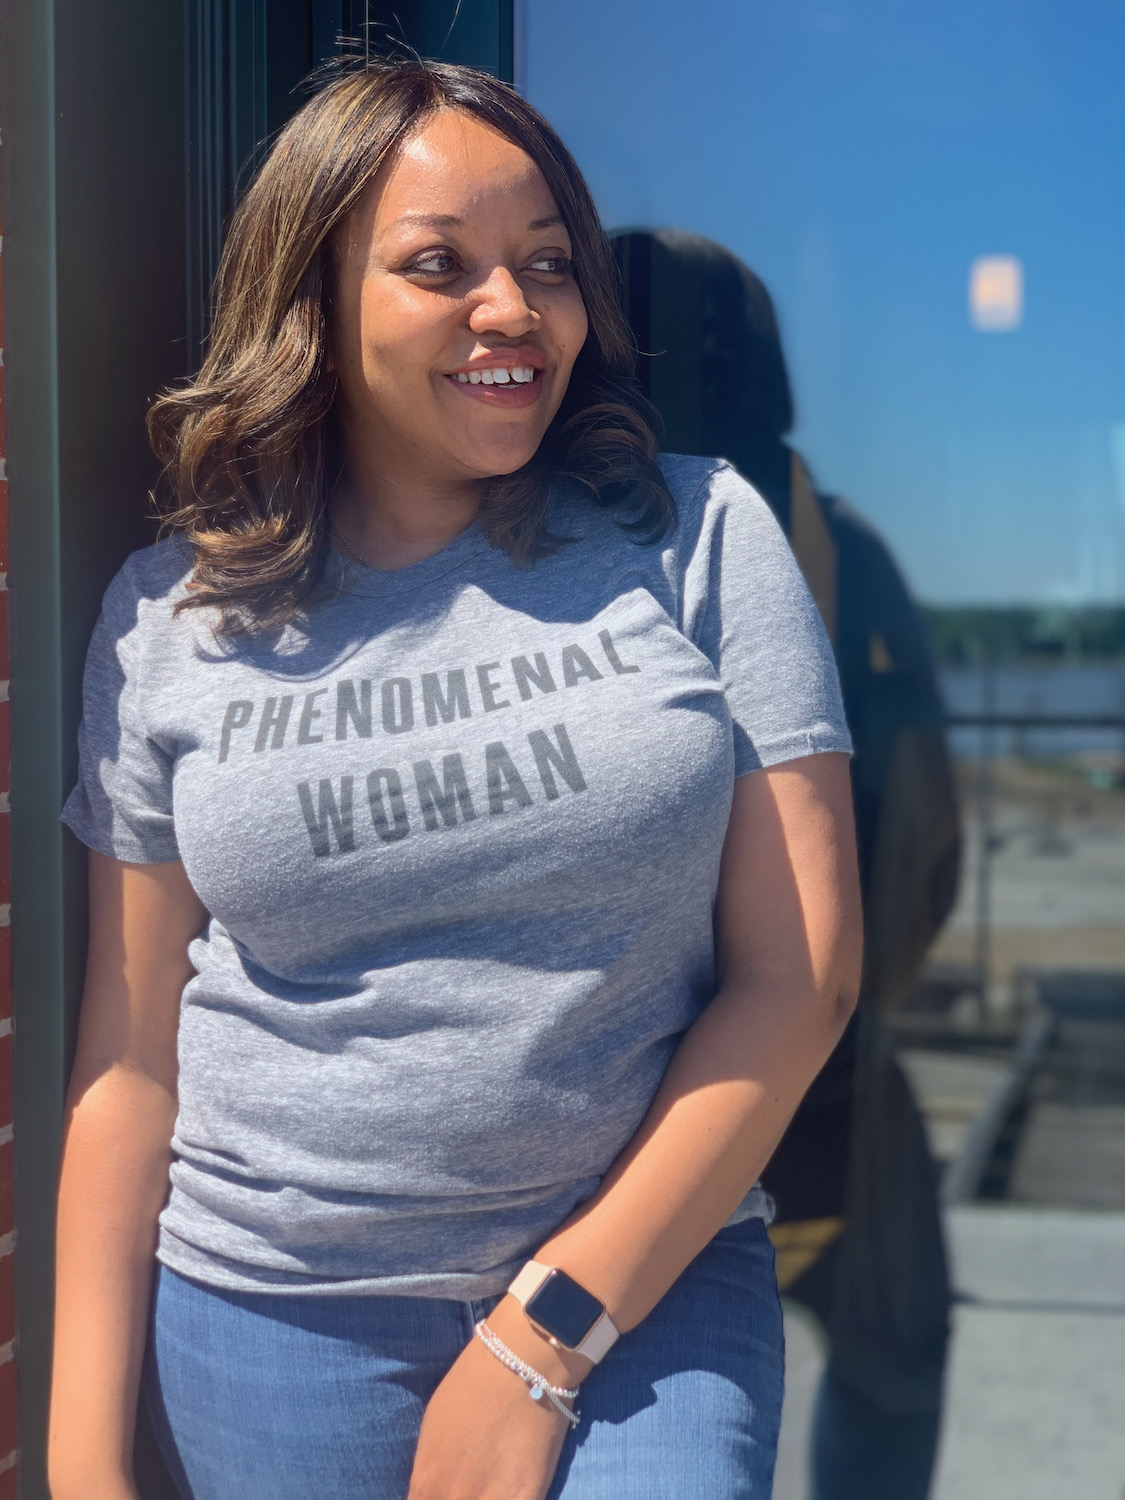 Smiling KB looking away on a sunny day. Wearing a gray t-shirt that says Phenomenal Woman